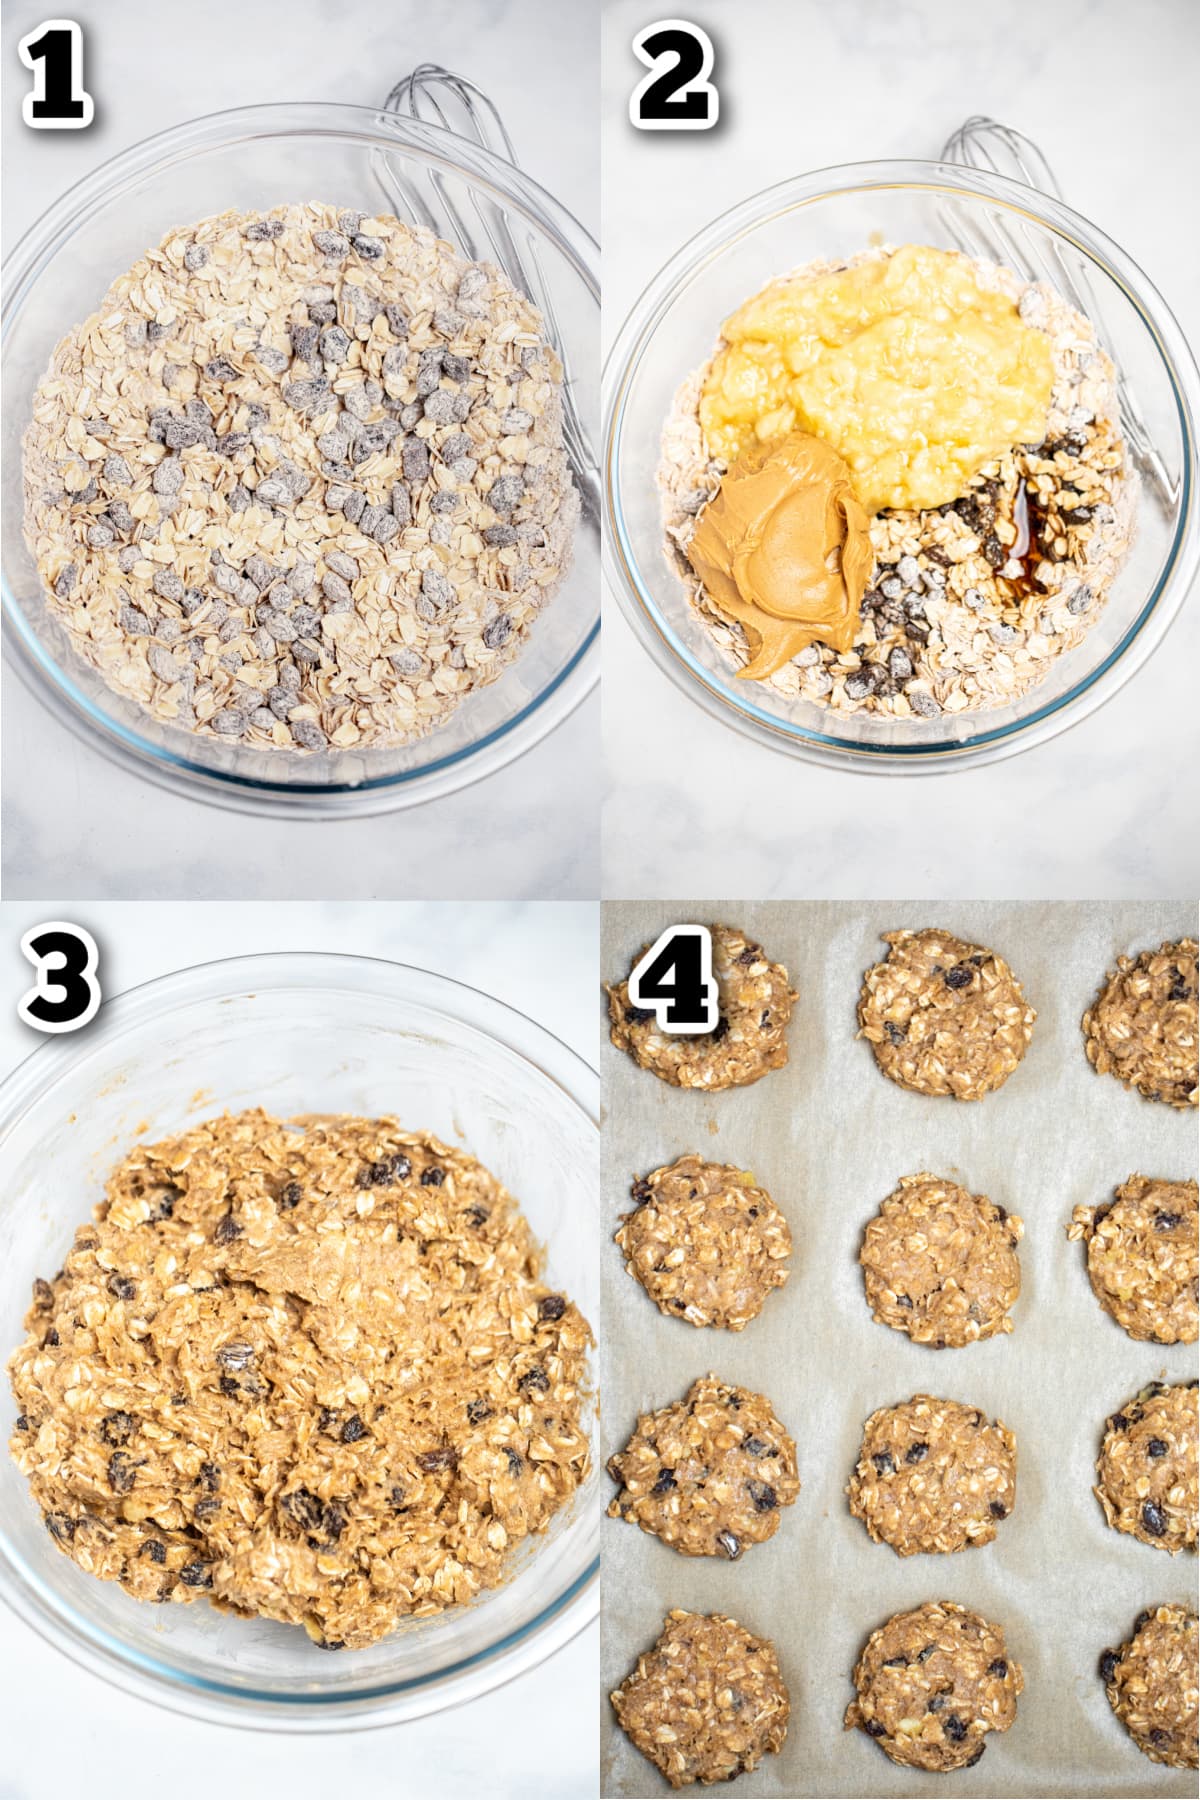 Step by step photos for how to make oatmeal breakfast cookies.